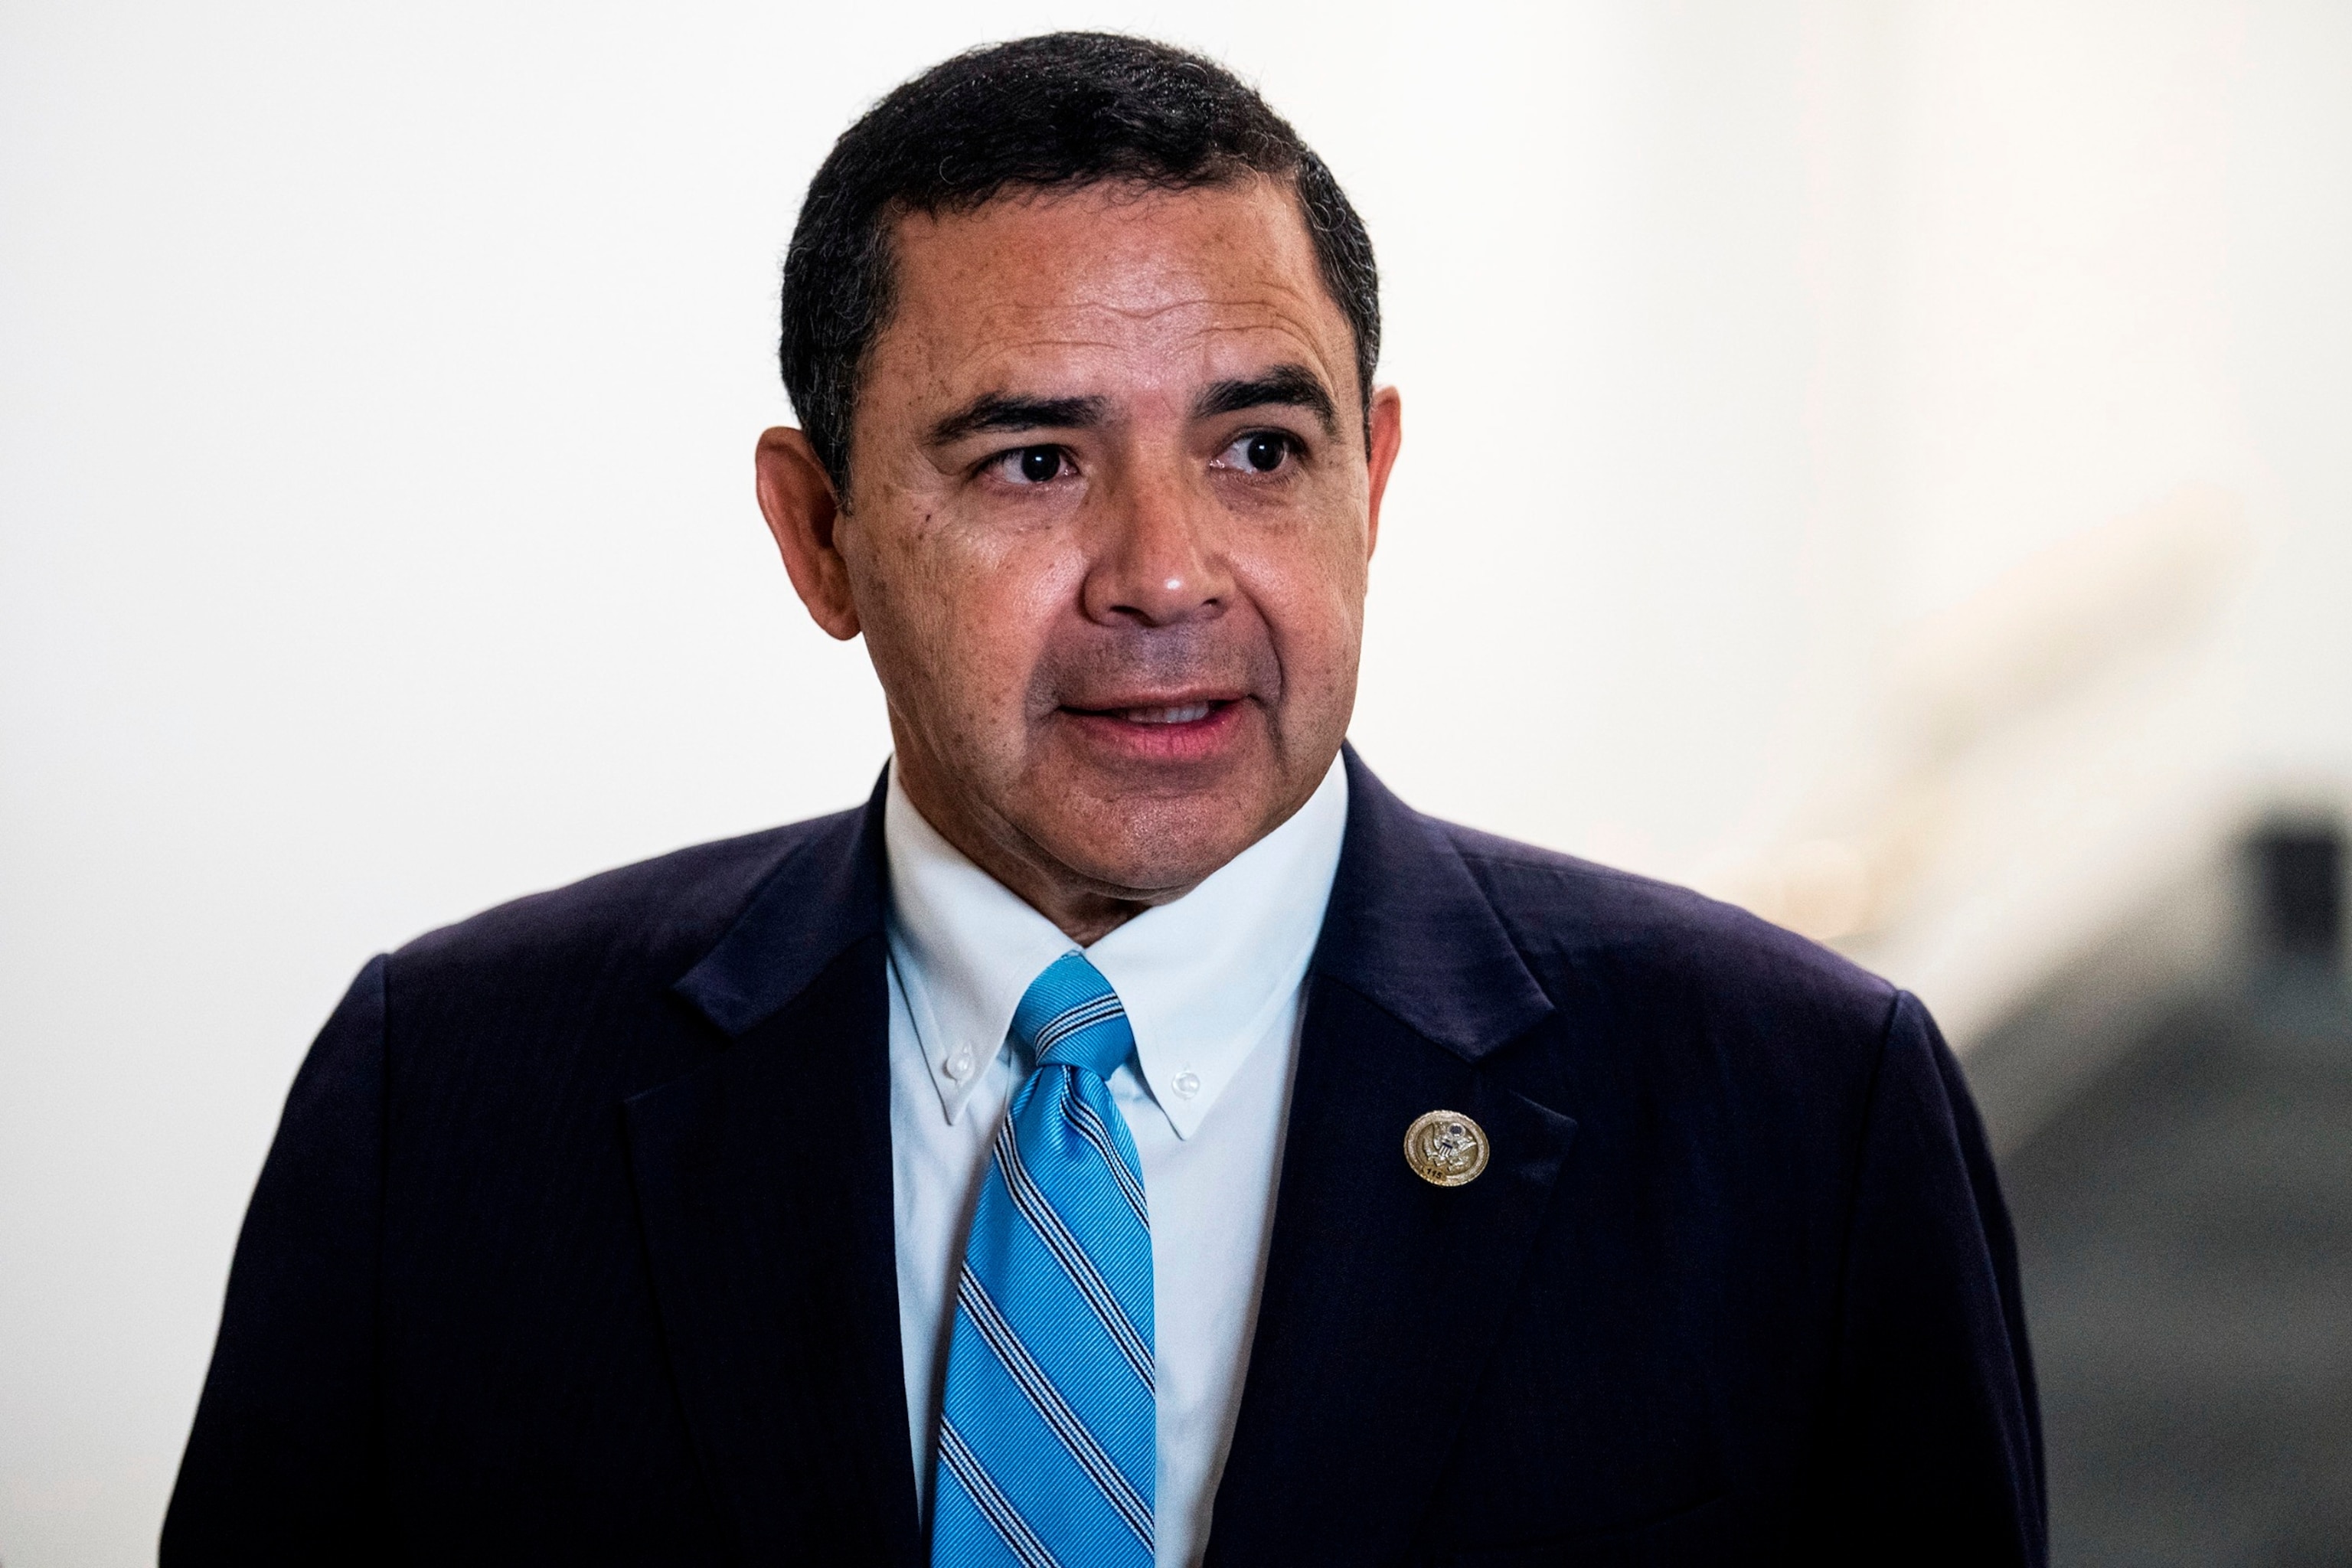 PHOTO: In this Nov. 17, 2022, file photo, Rep. Henry Cuellar is seen outside a meeting of the House Democratic Caucus in the U.S. Capitol, in Washington, D.C.